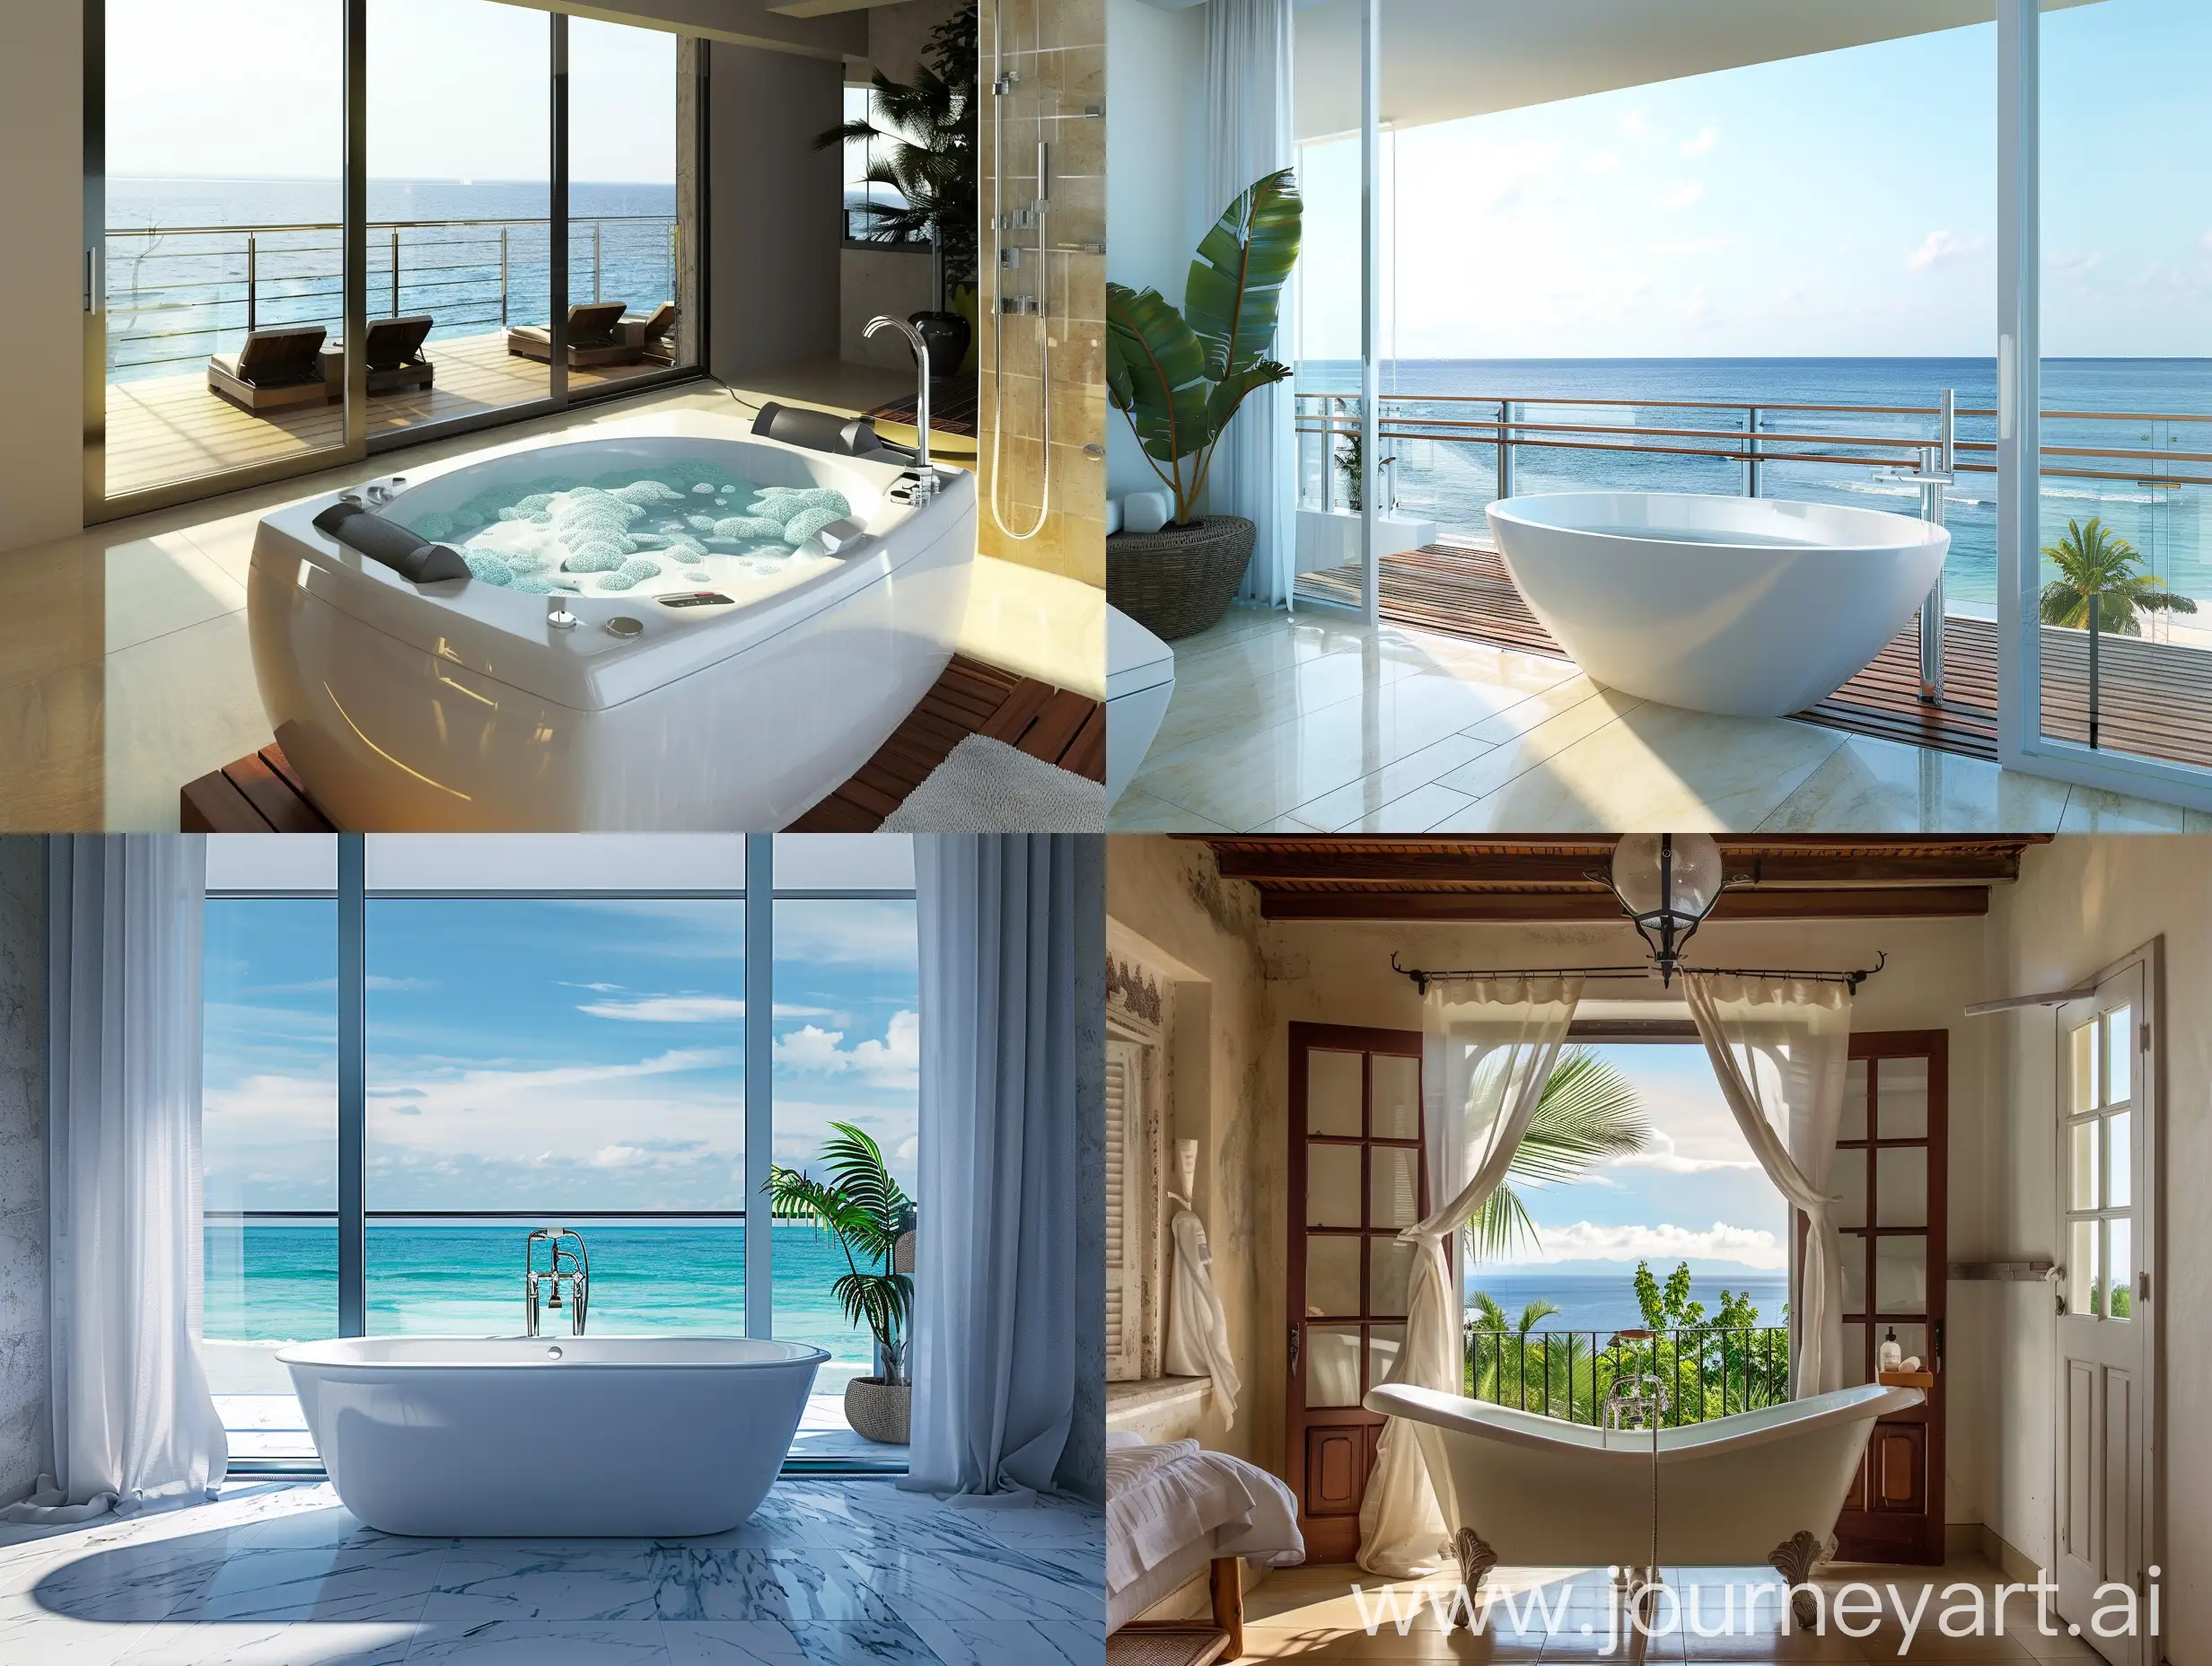 Luxurious-Oceanfront-Bathtub-with-Private-Balcony